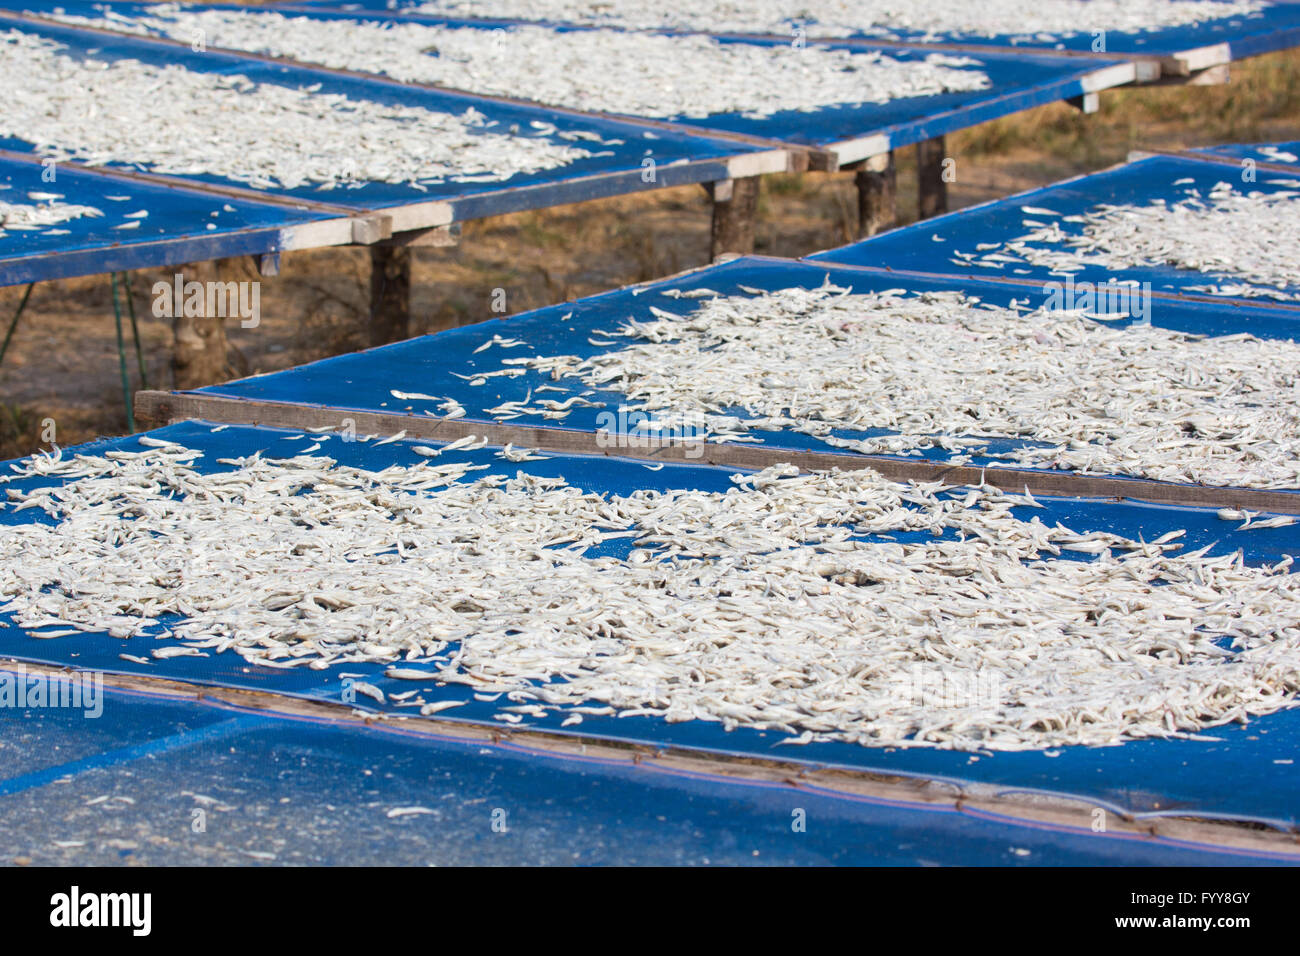 Small salted fish dried under the sun in Chanthaburi province, Thailand Stock Photo